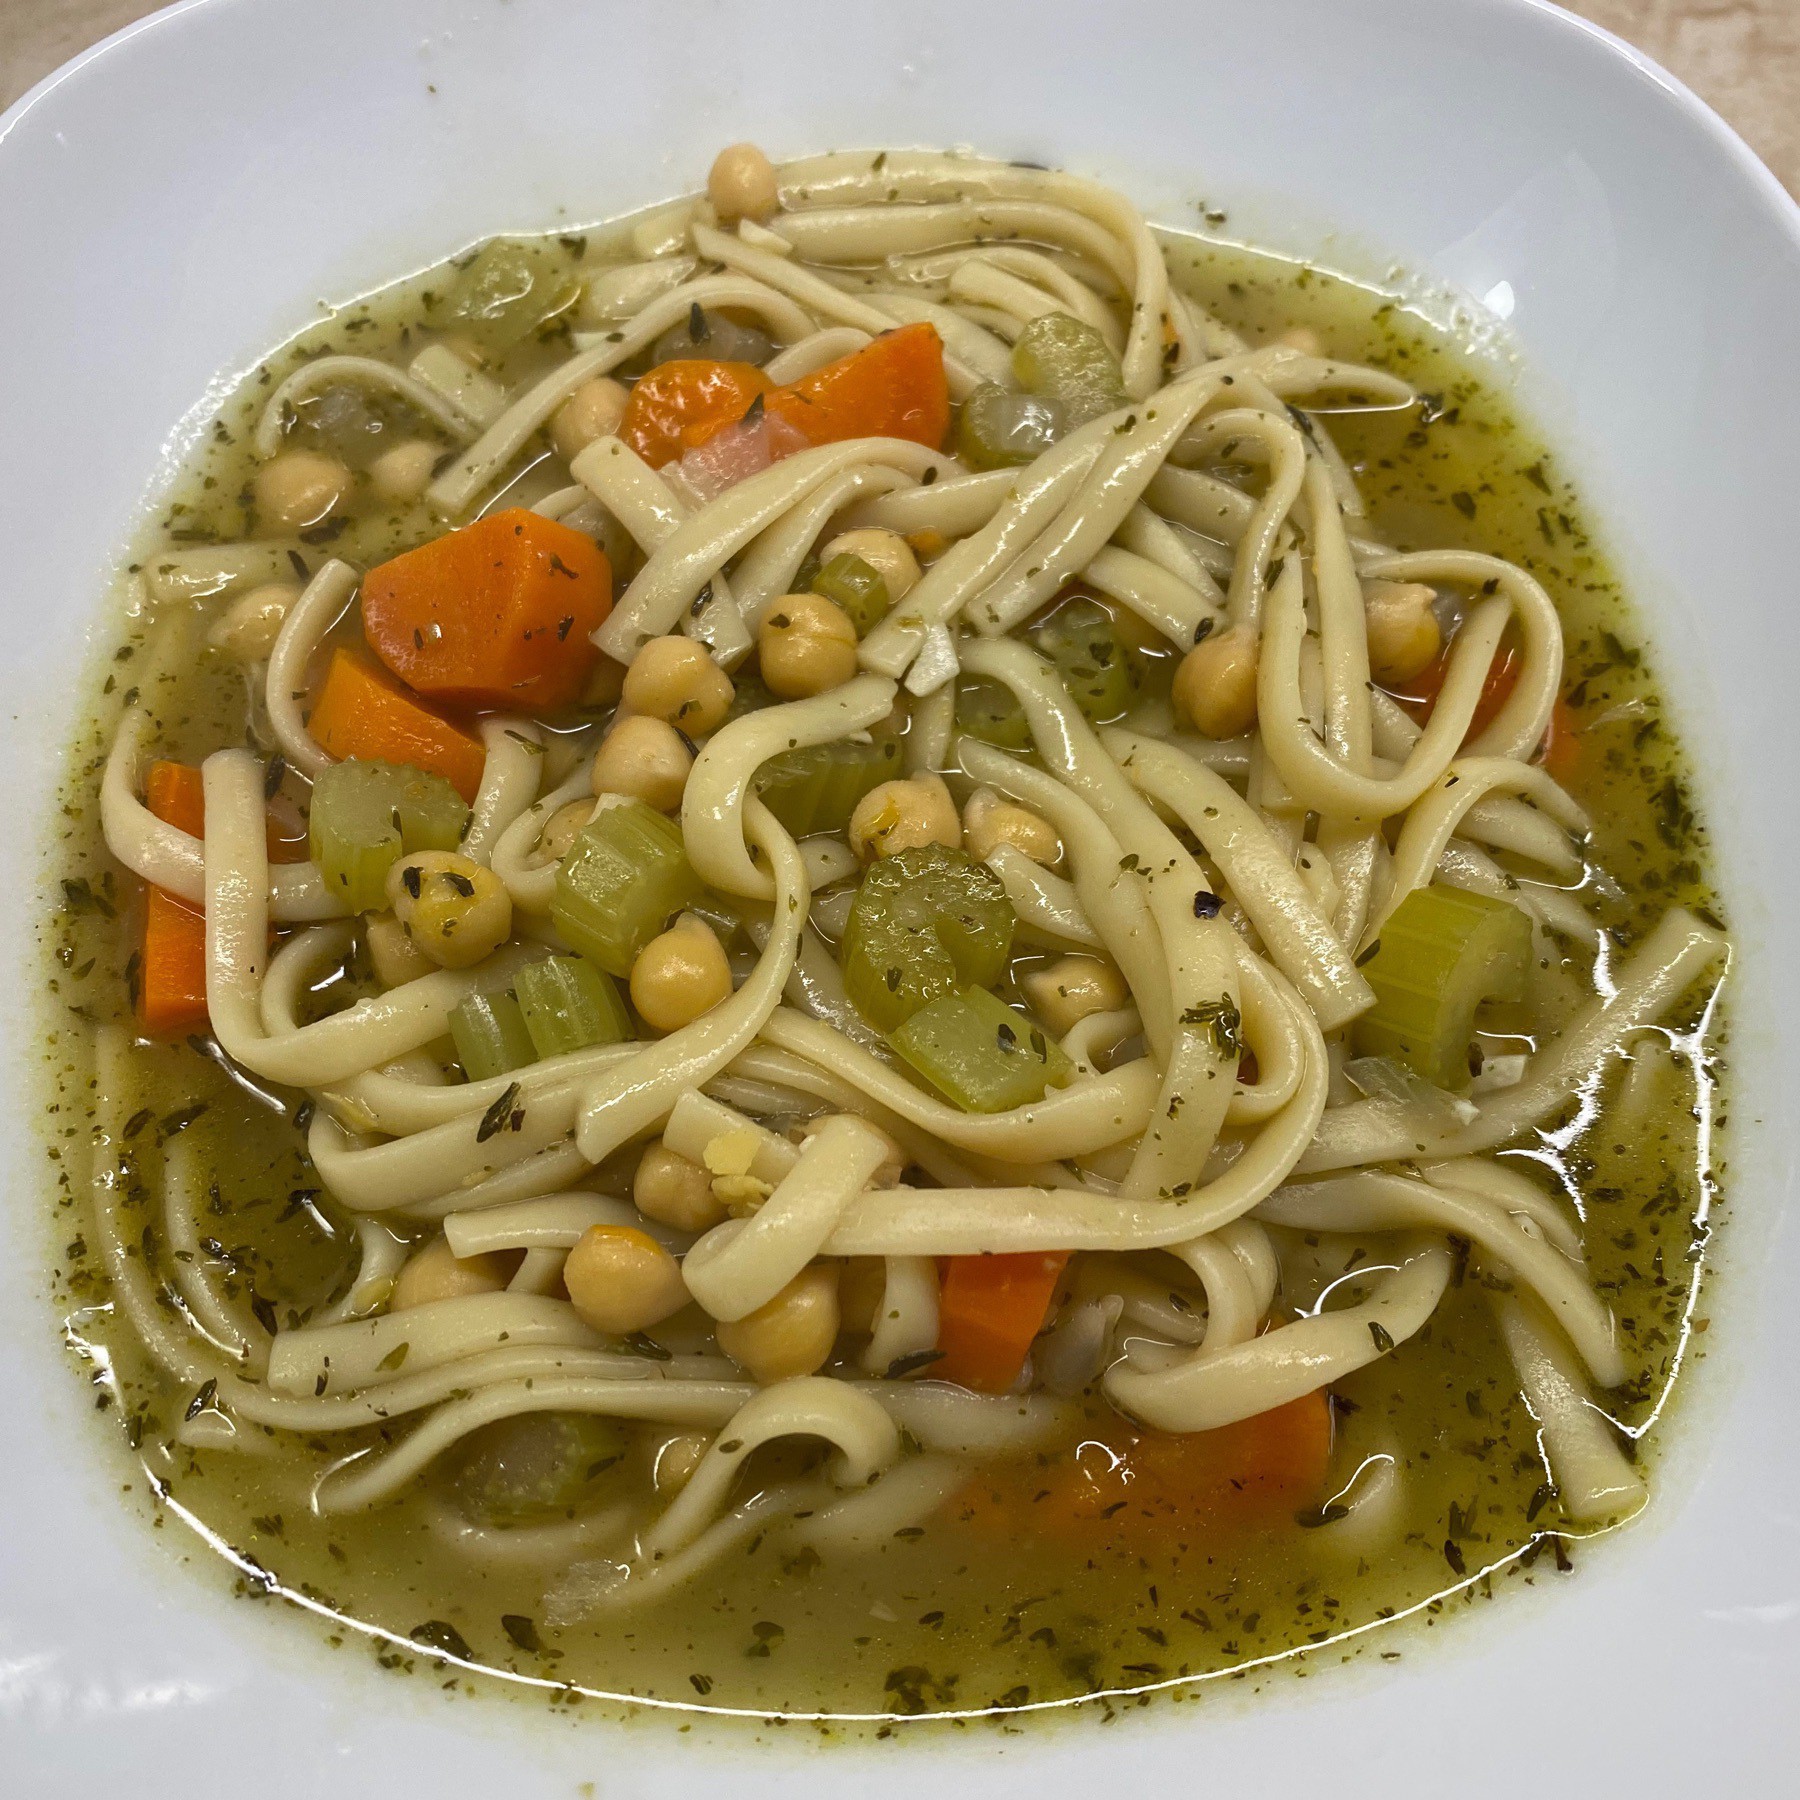 Bowl of soup with noodles, chickpeas, carrots, and celery.